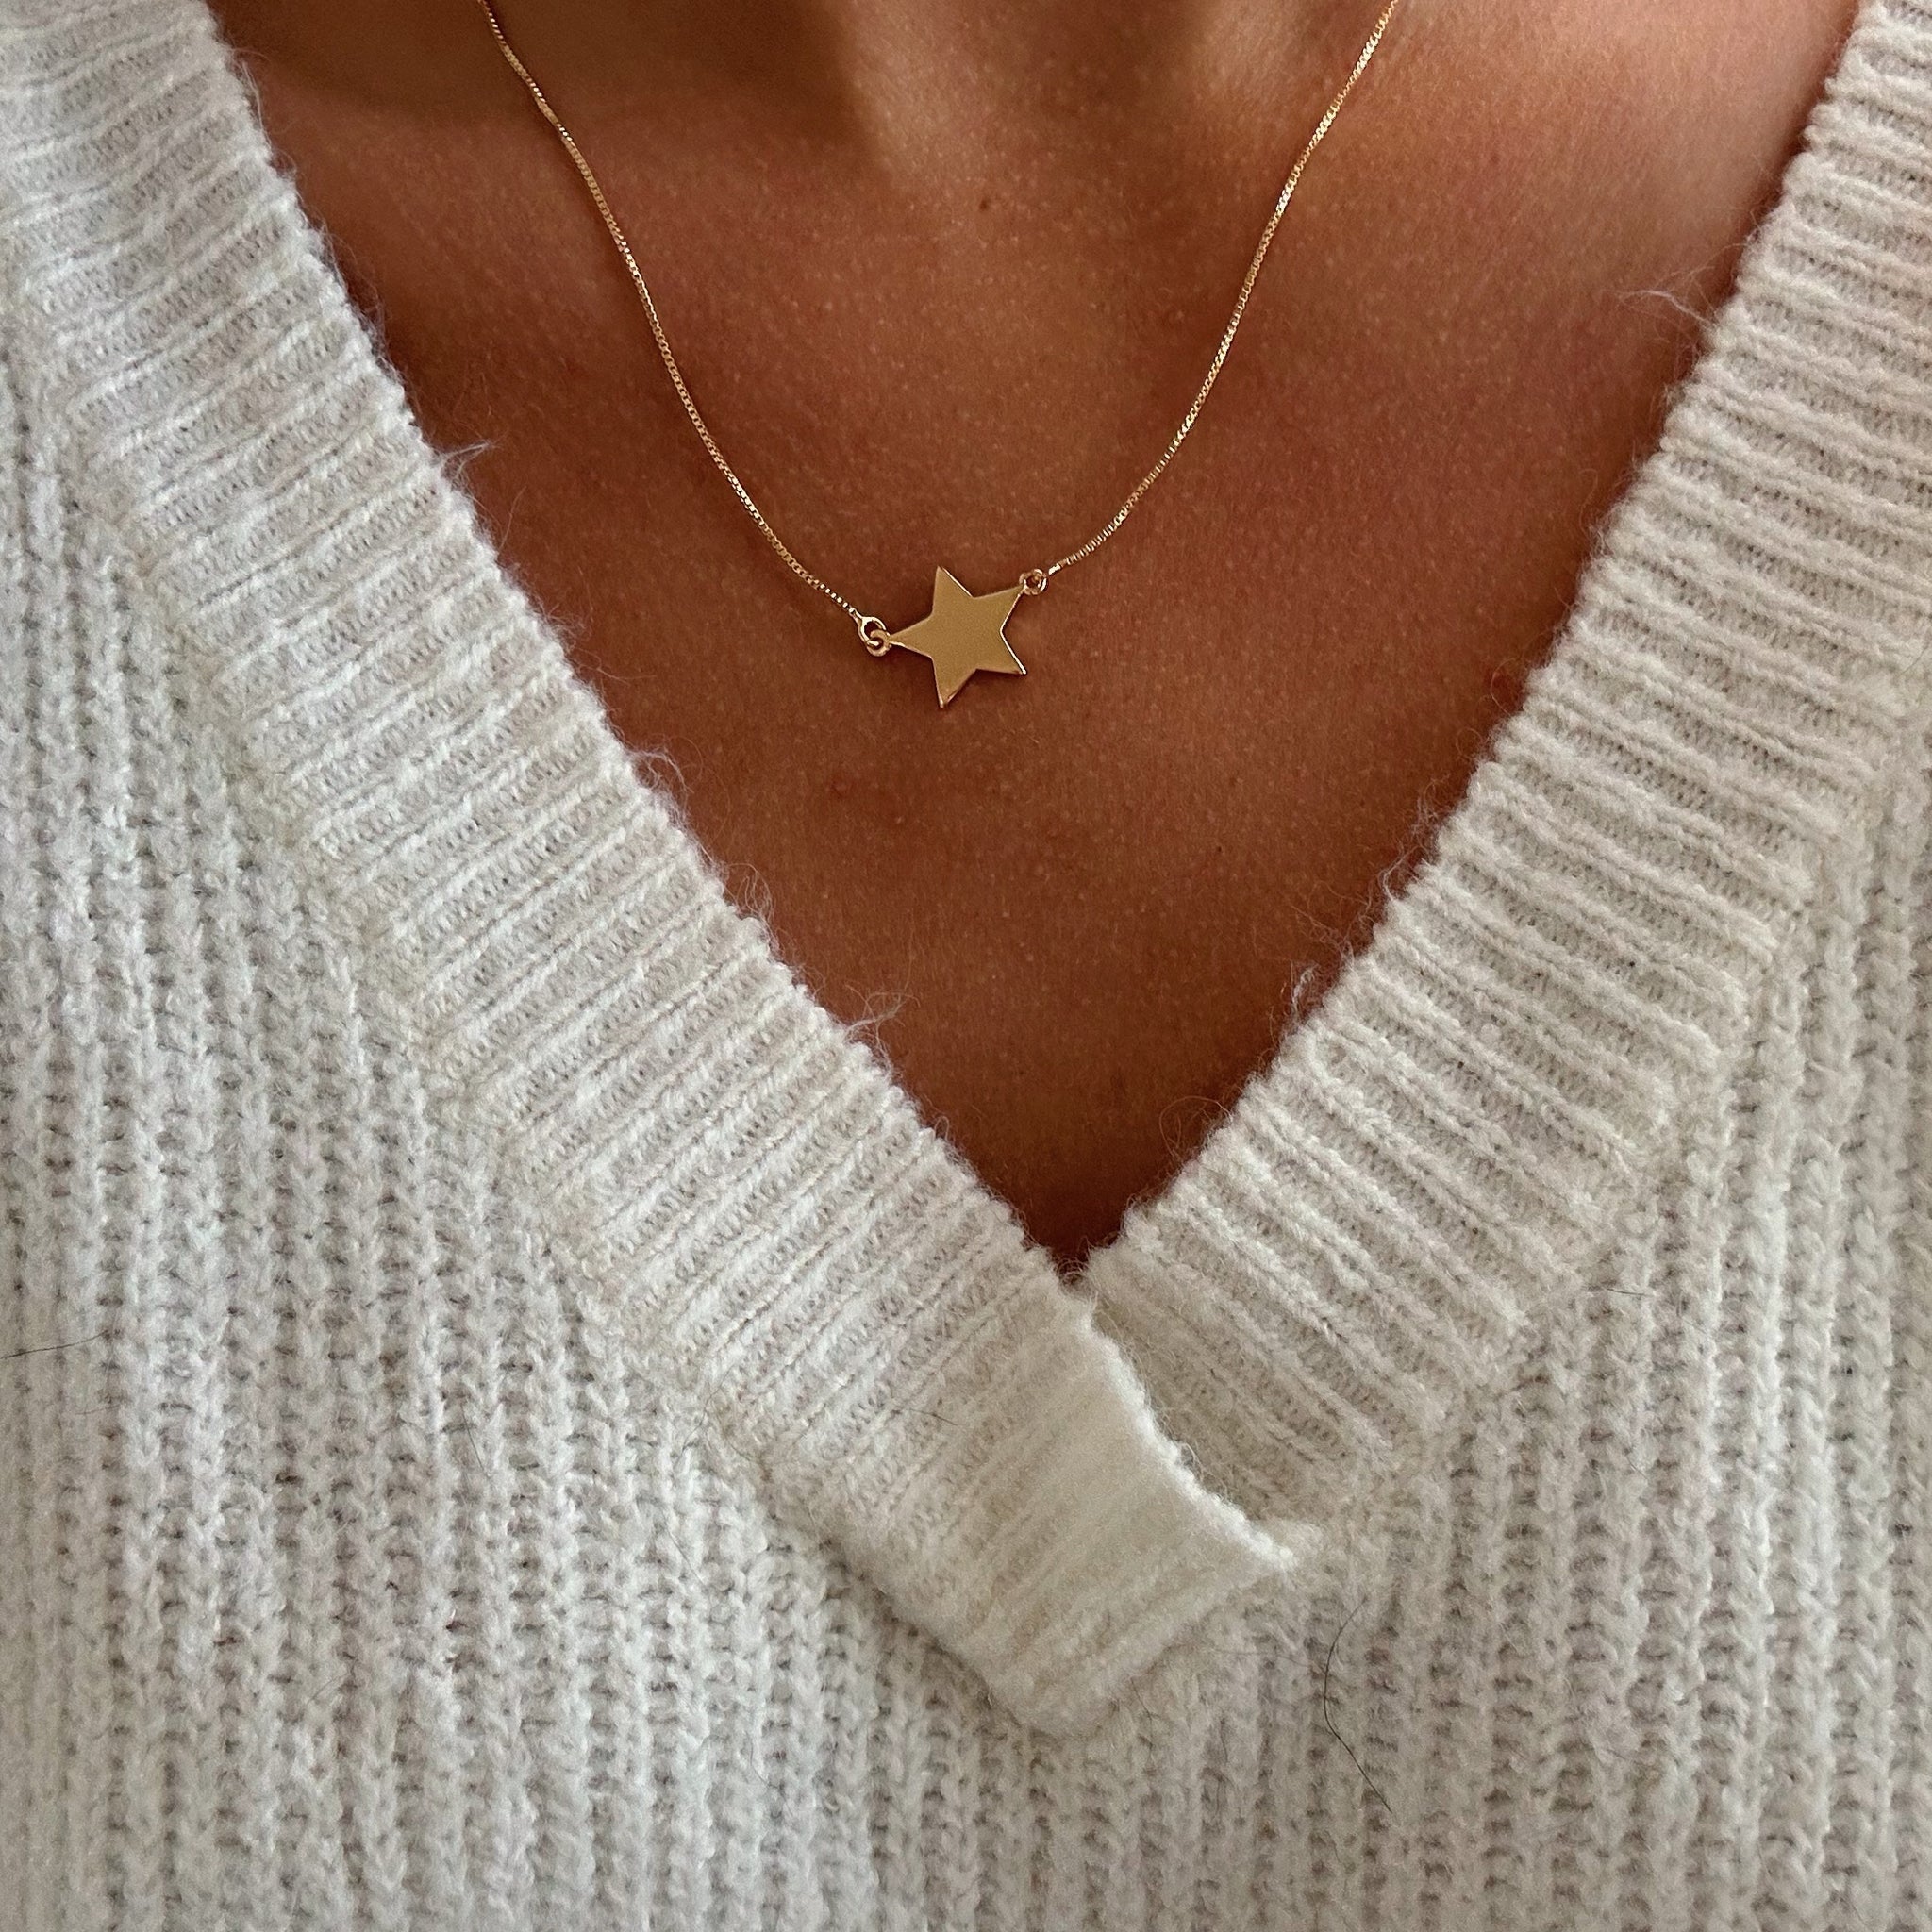 STAR CONNECTOR NECKLACE